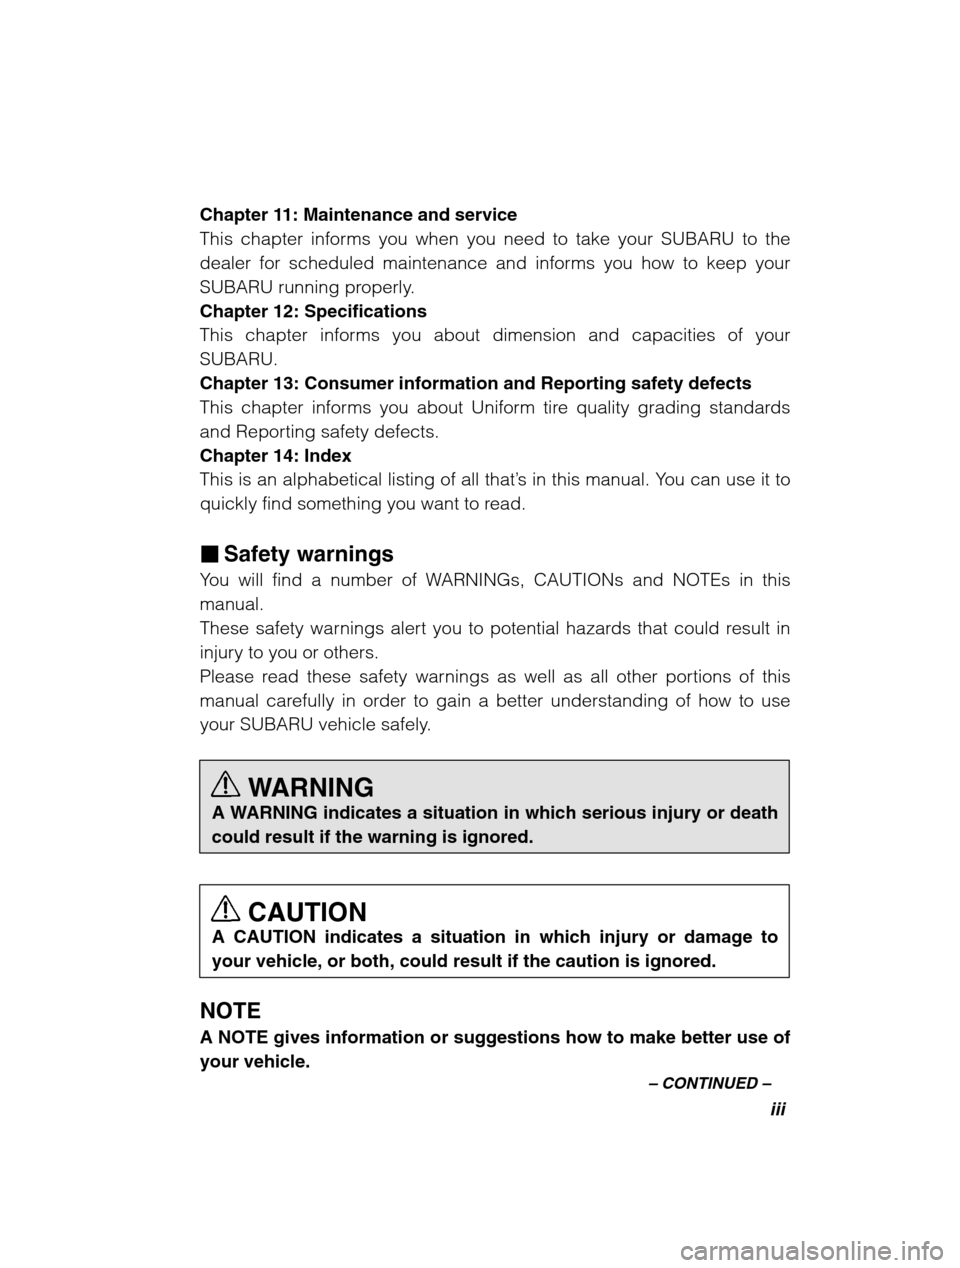 SUBARU OUTBACK 2002 3.G Owners Manual iii
–
 CONTINUED  –
Chapter 11: Maintenance and service 
This chapter informs you when you need to take your SUBARU to the
dealer for scheduled maintenance and informs you how to keep your
SUBARU 